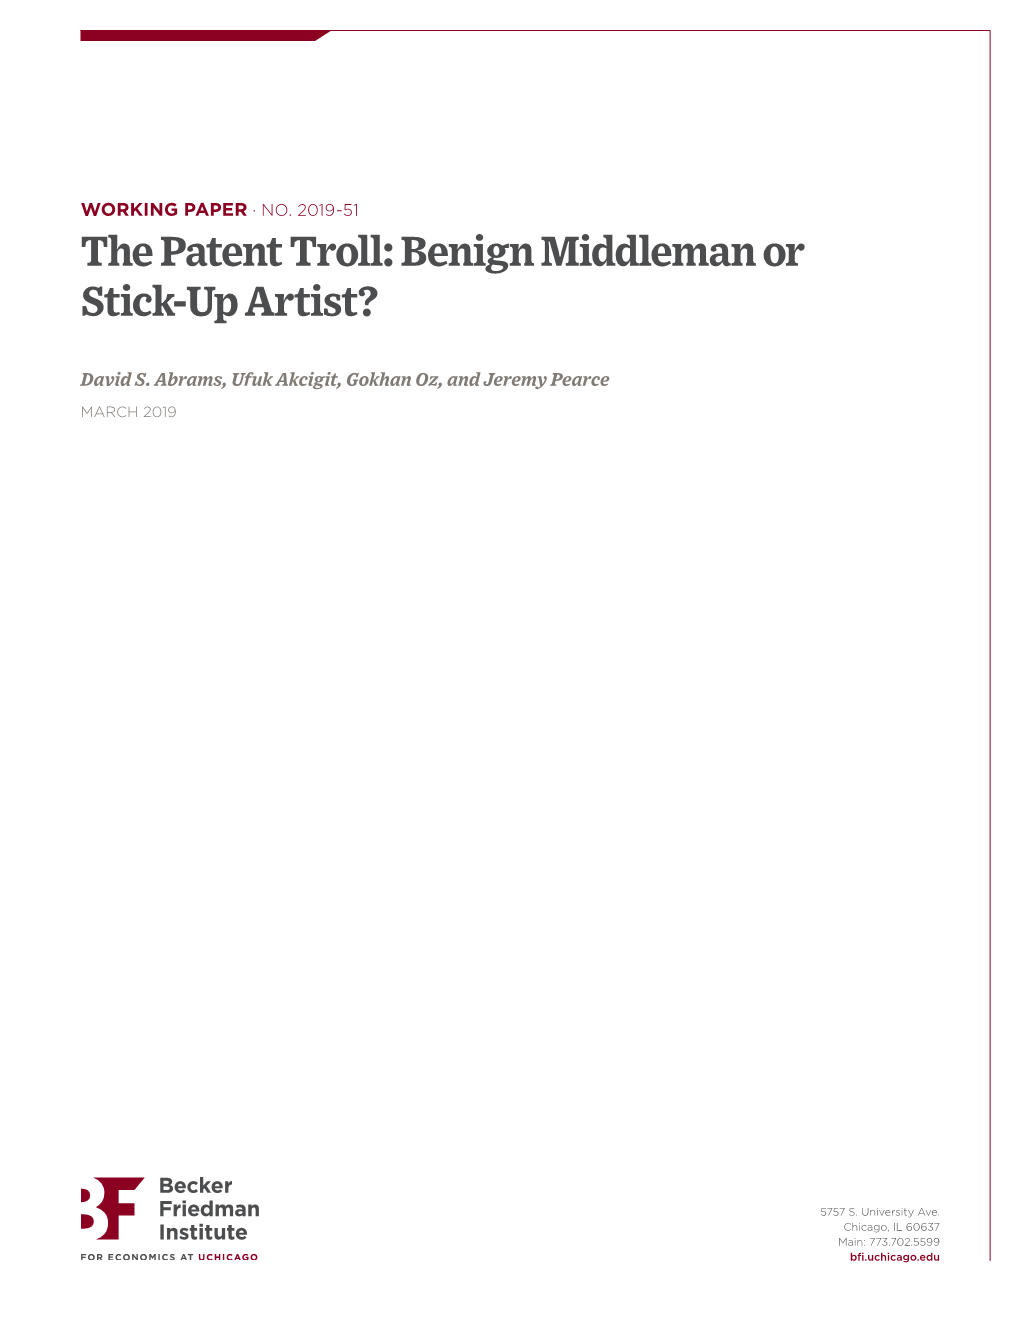 The Patent Troll: Benign Middleman Or Stick-Up Artist?